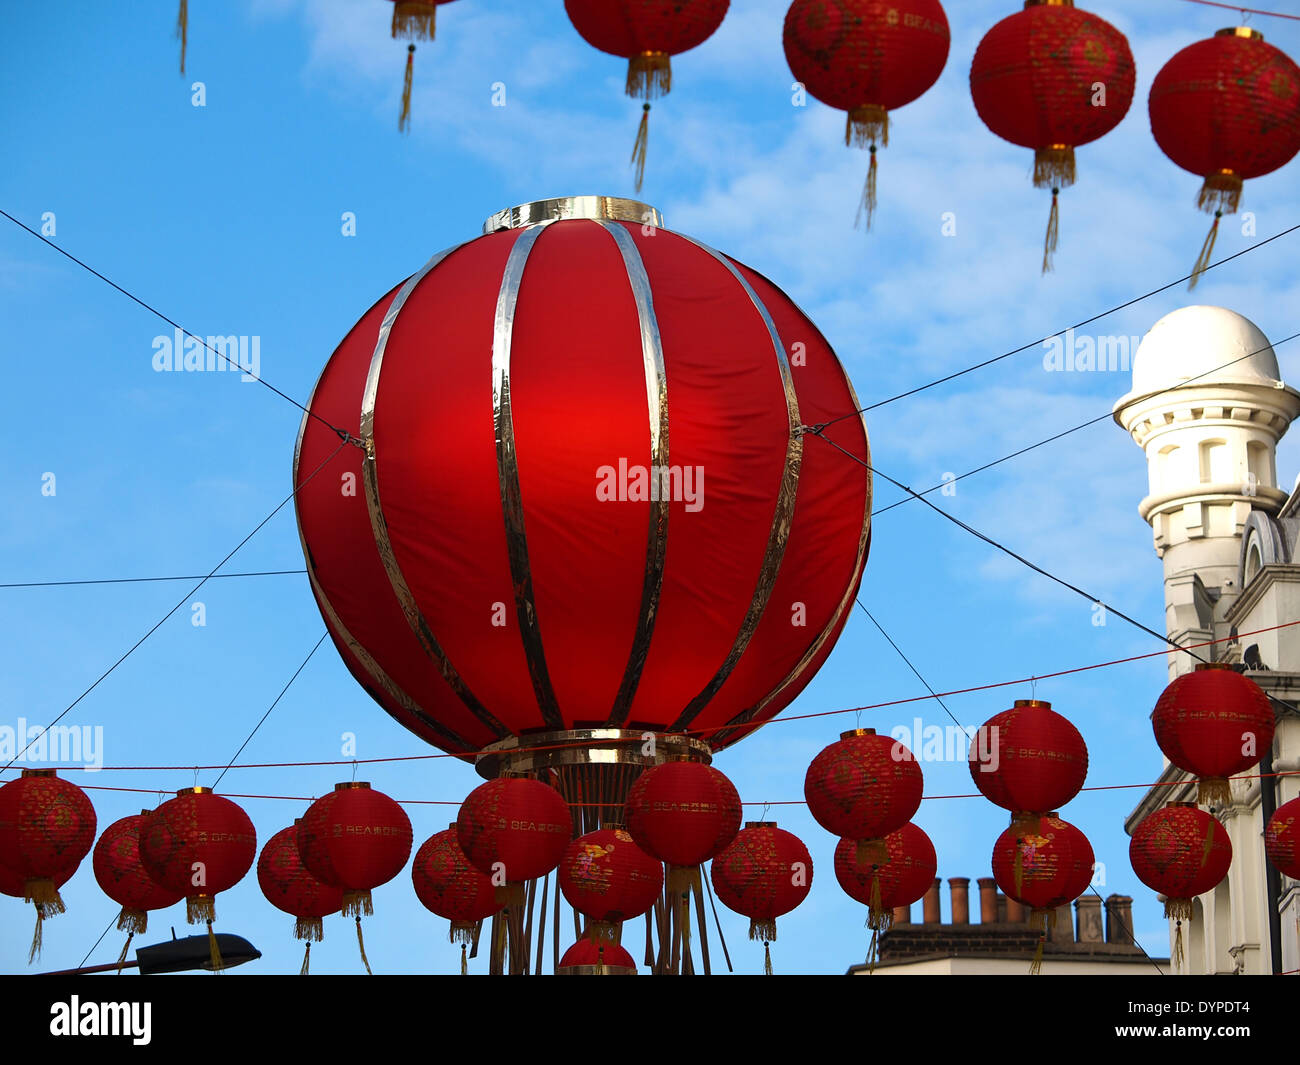 Giant Chinese lanterns in London's Chinatown Stock Photo